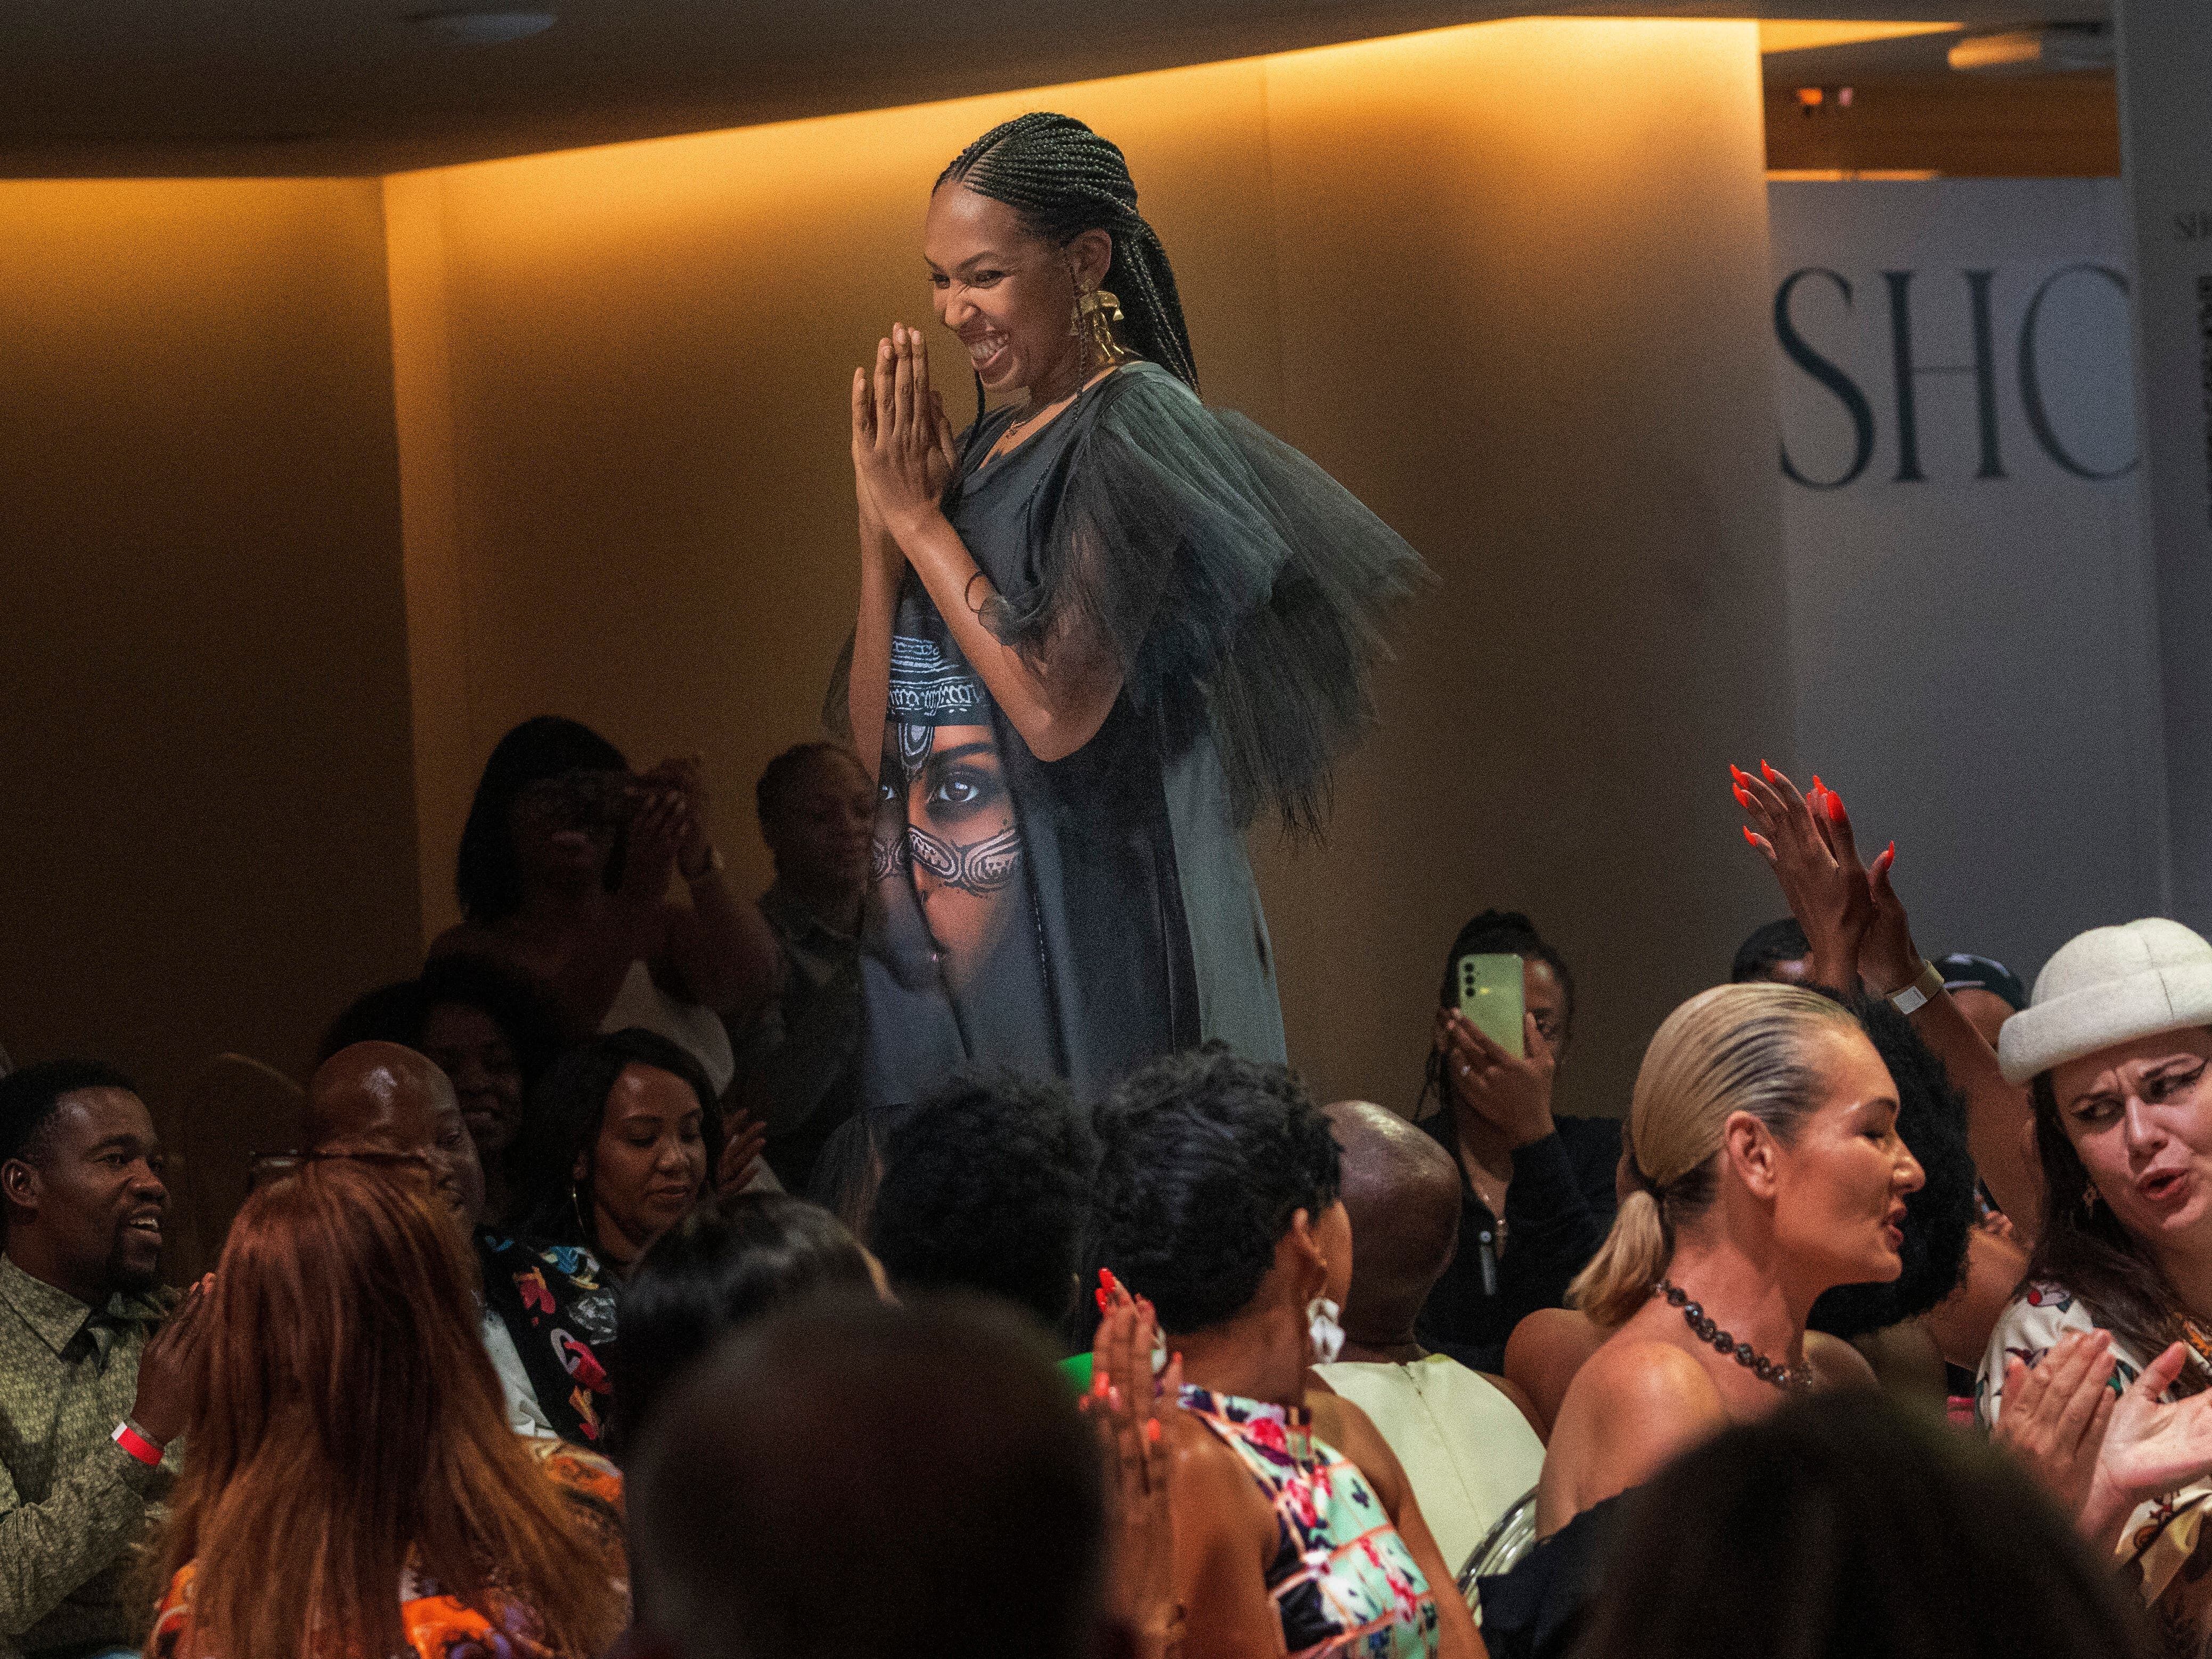 In Pictures: Niger designer Alia Bare takes centre stage at Joburg Fashion Week